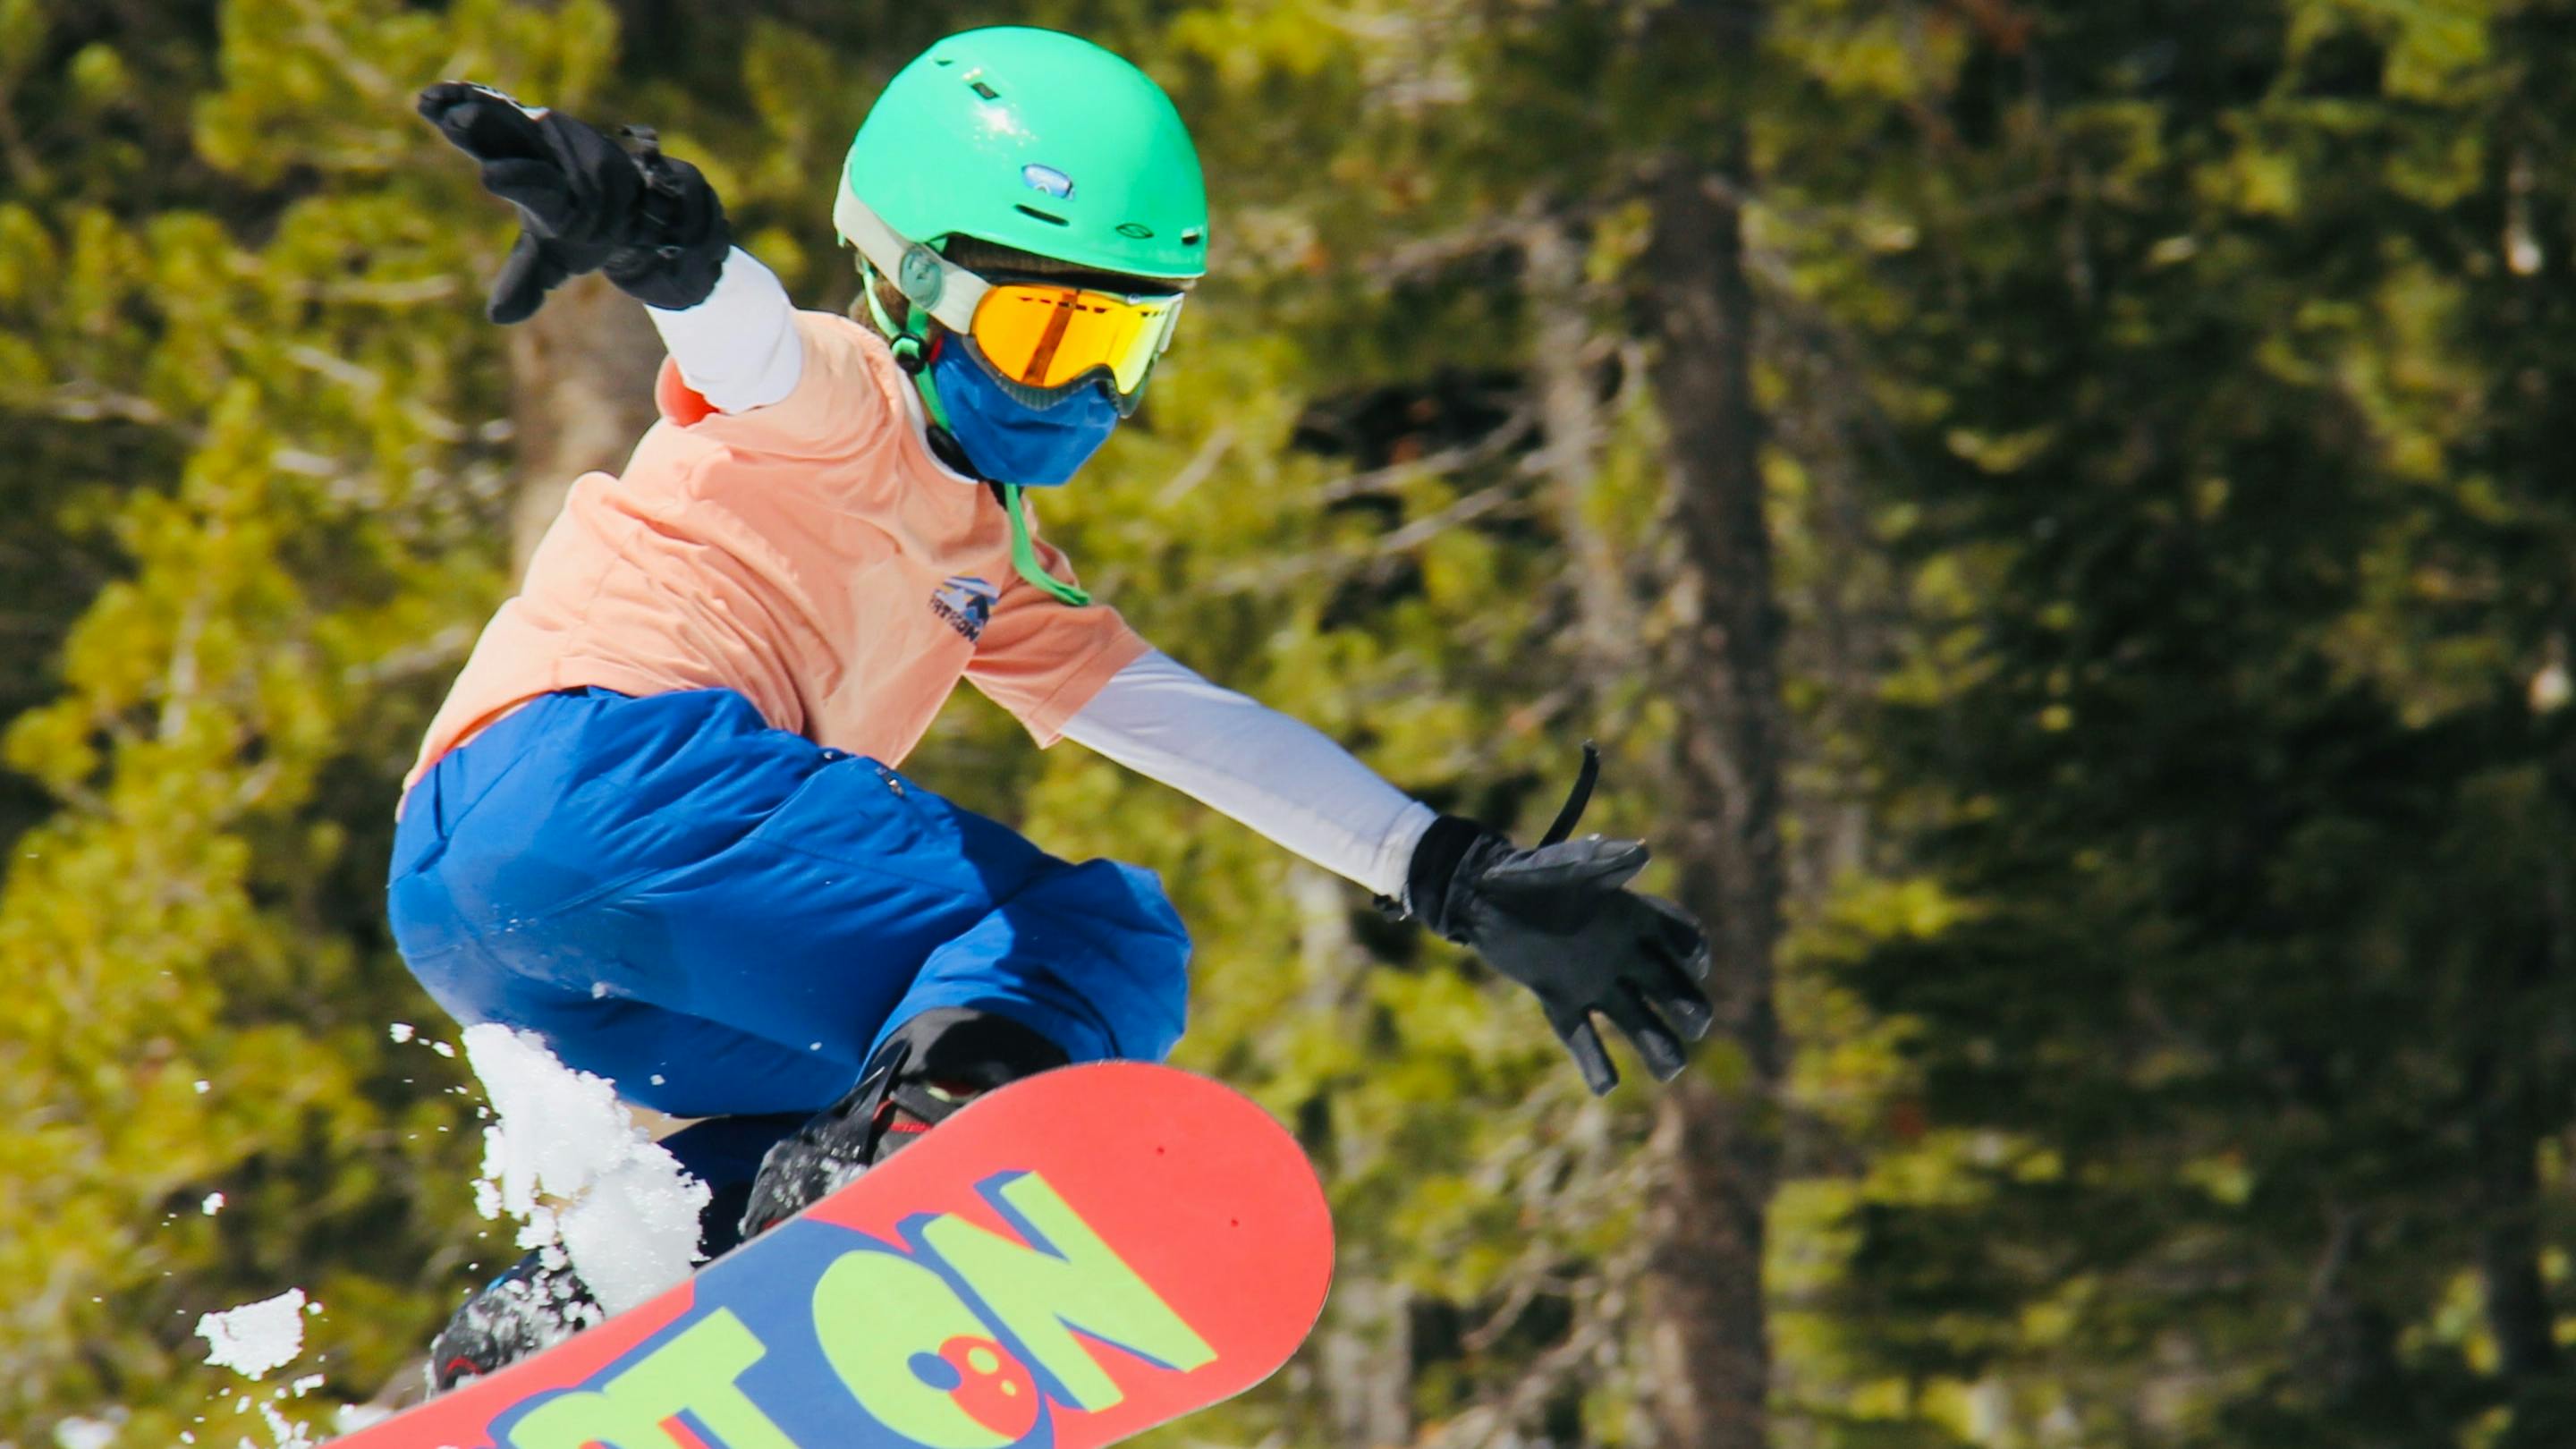 A young girl jumps with her Burton snowboard.